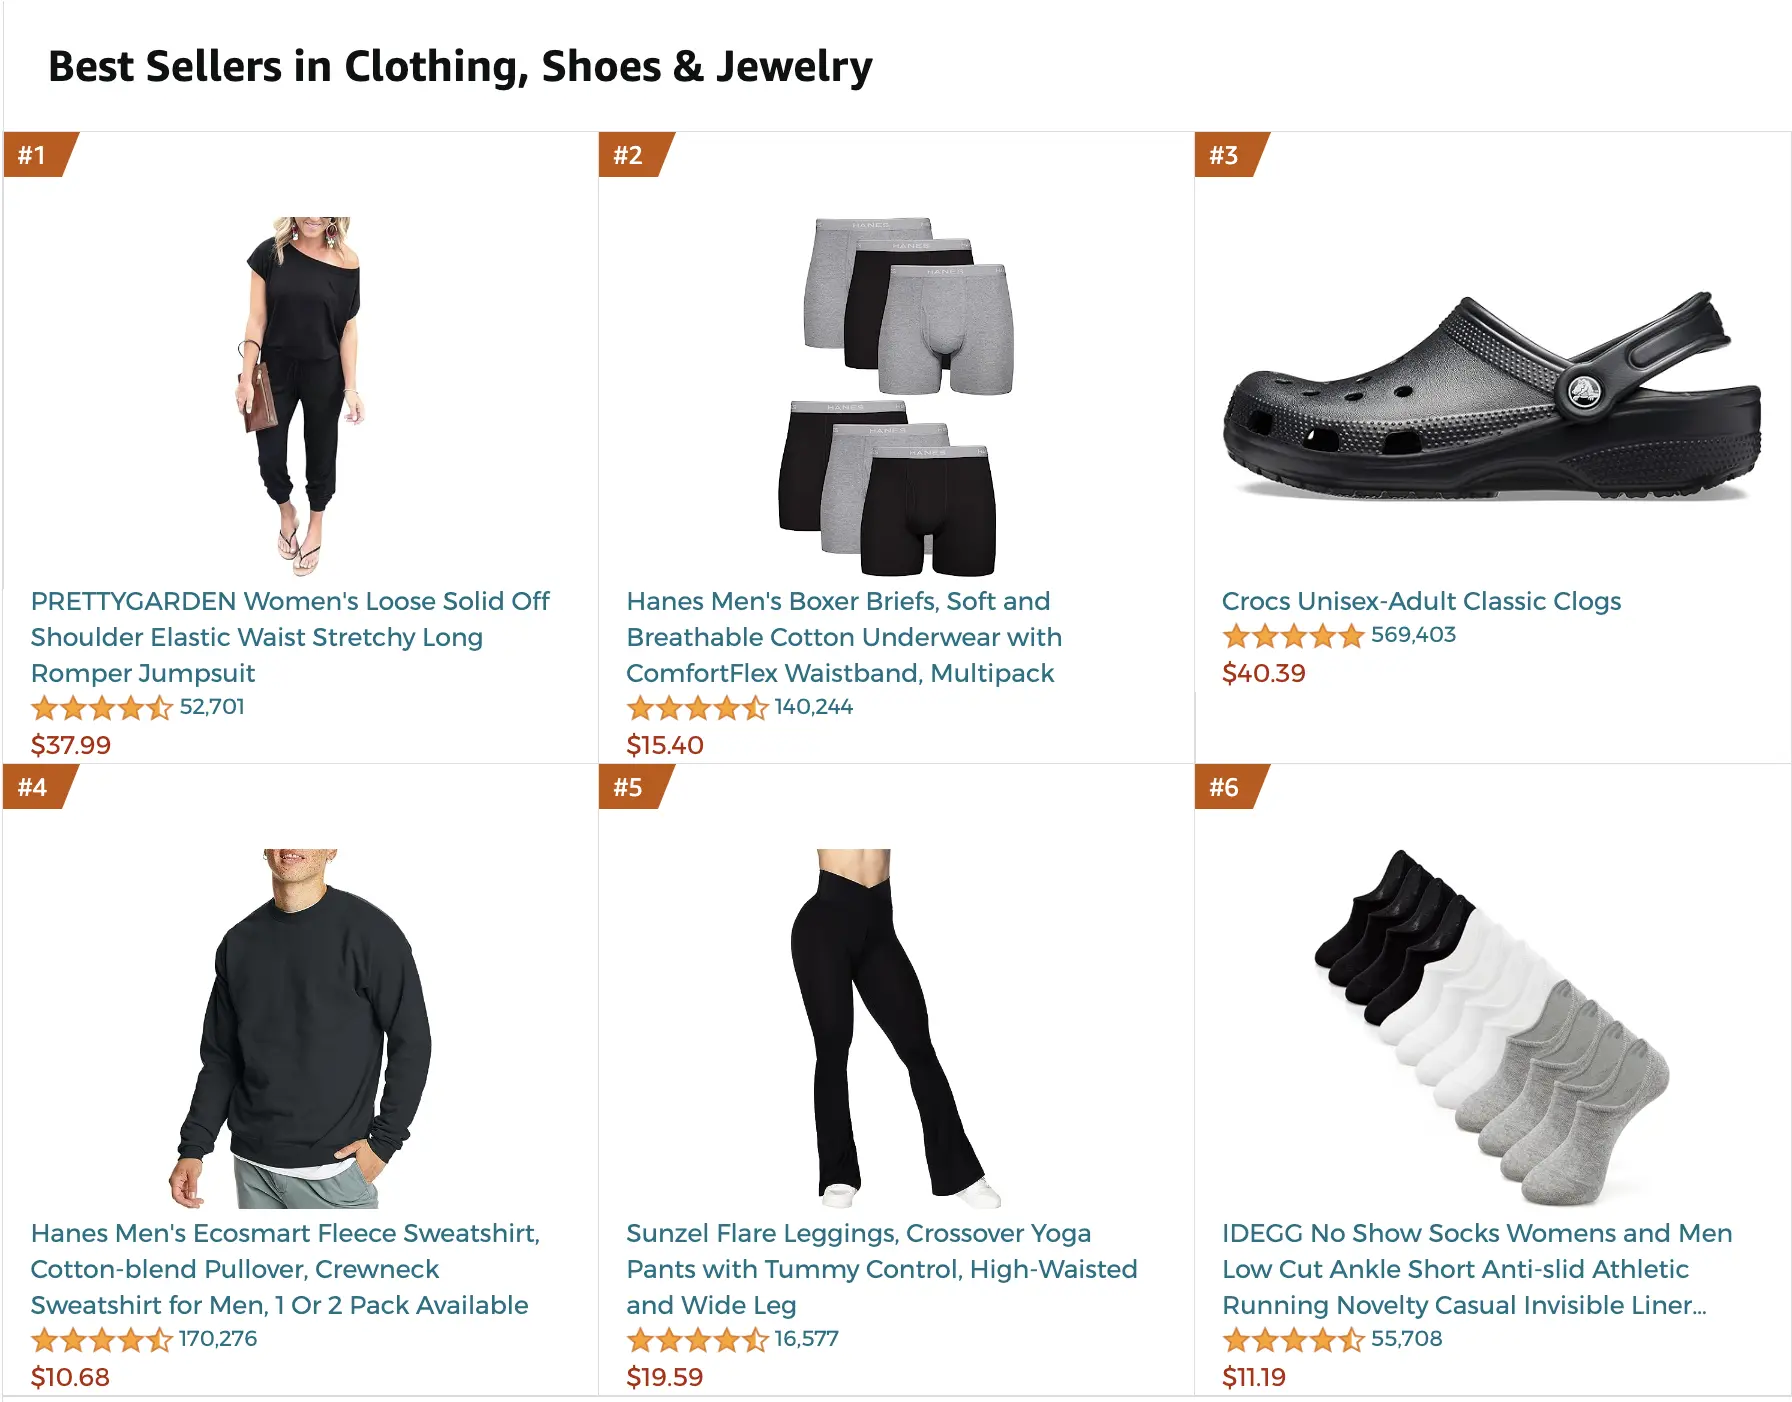 Clothes Shoes and Jewelry best sellers on Amazon.